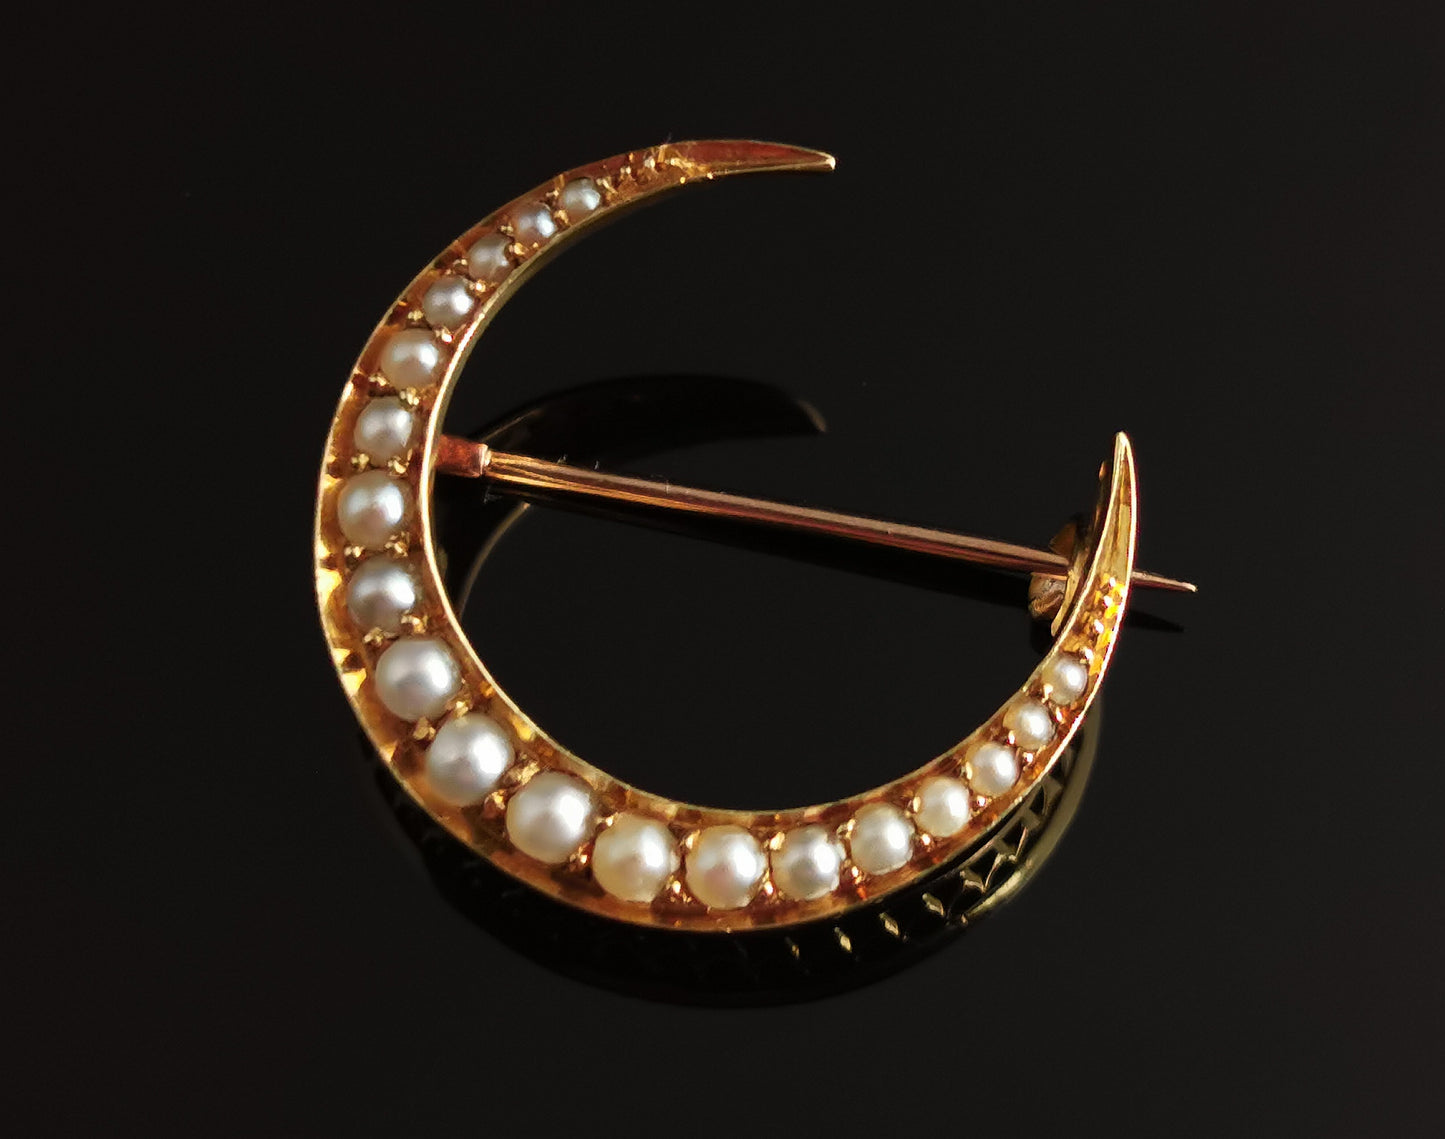 Antique Victorian 15ct gold and Pearl Crescent Moon brooch, pin